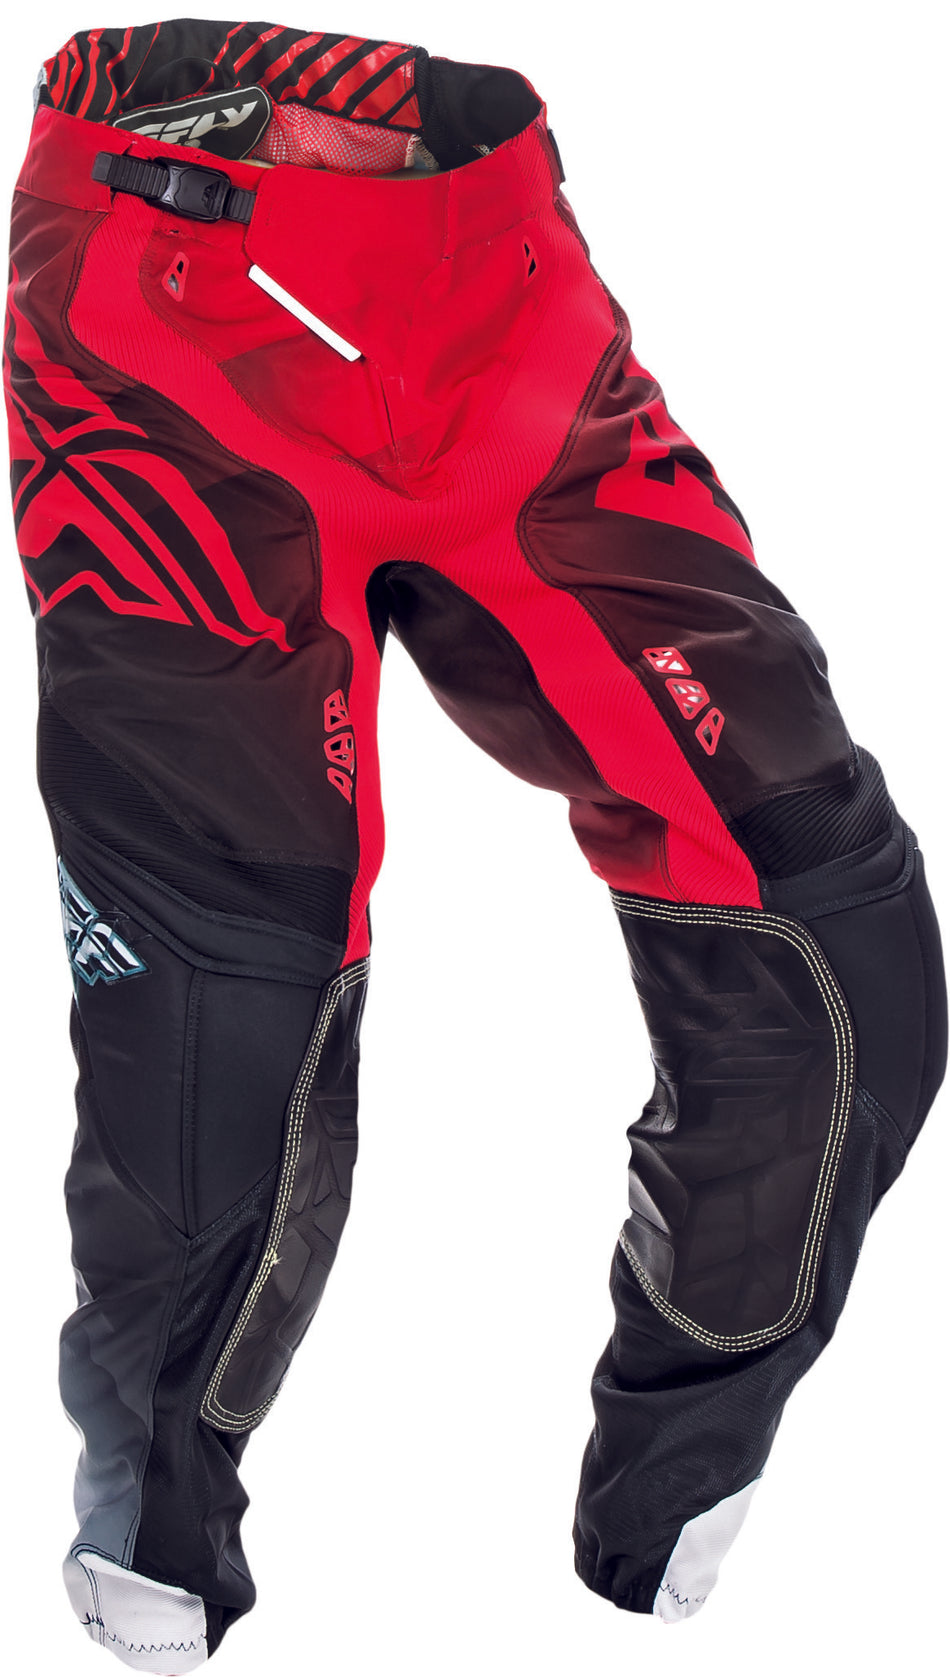 FLY RACING Lite Hydrogen Pant Red/Black/White Sz 30 370-73230